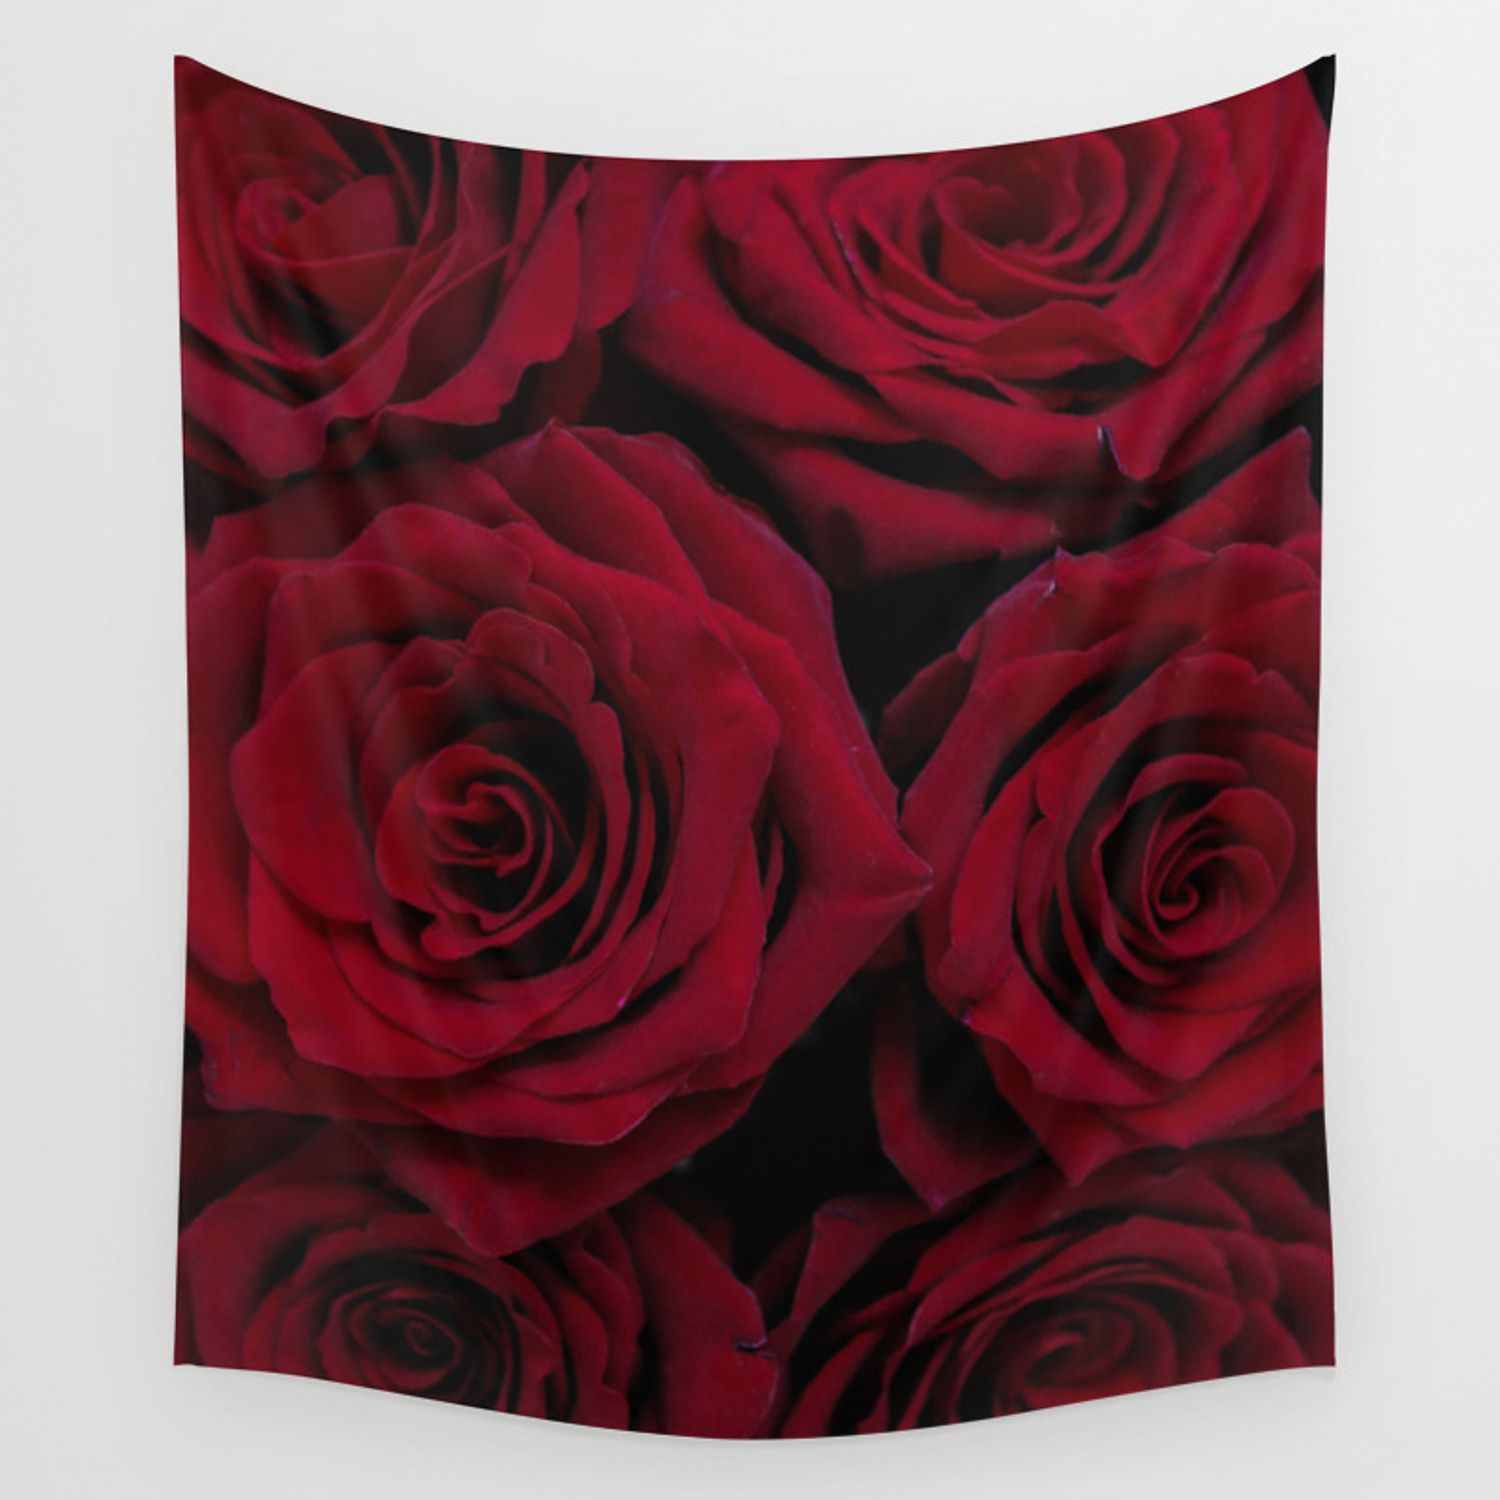 Most Current Ruby Roses Wall Tapestrymhenina Intended For Roses I Tapestries (View 13 of 20)